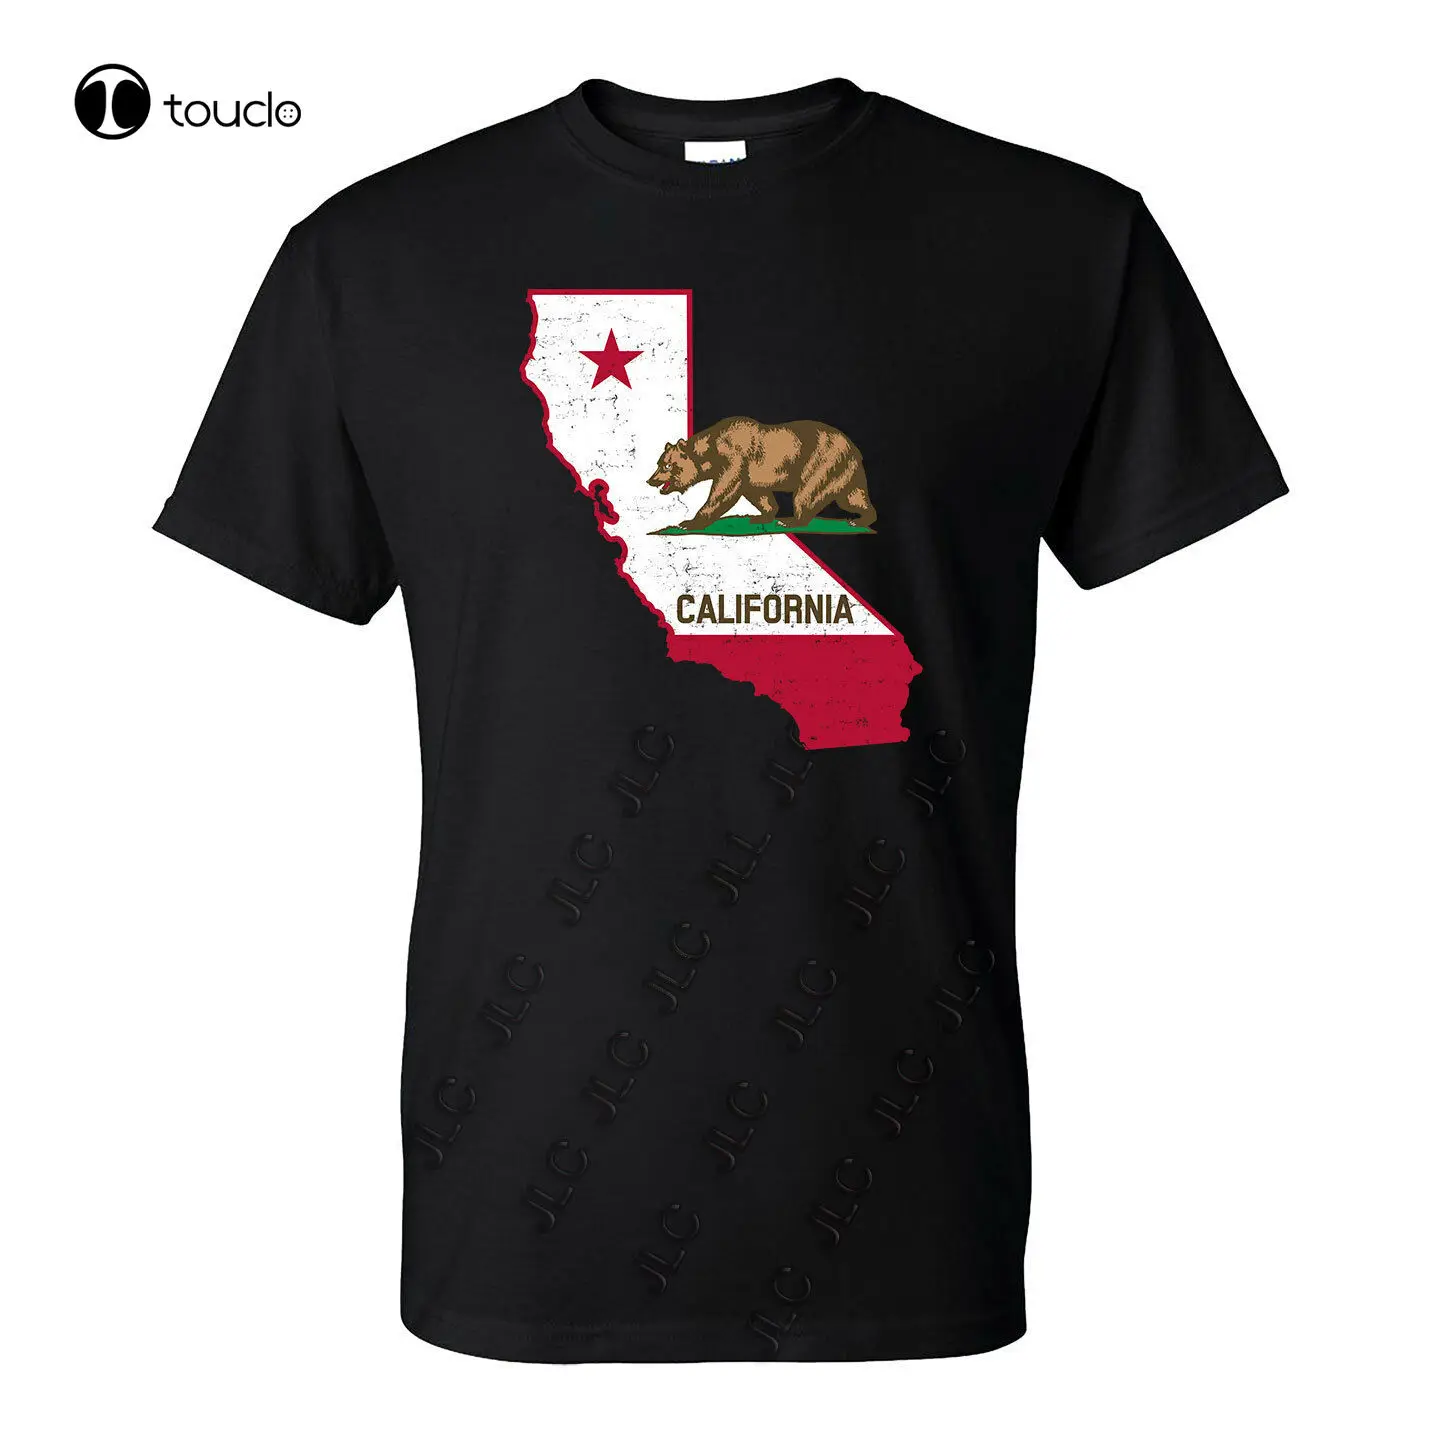 

California Republic State Outline T-Shirt (Differnent Colors) Ready To Ship! Custom Aldult Teen Unisex Digital Printing Xs-5Xl